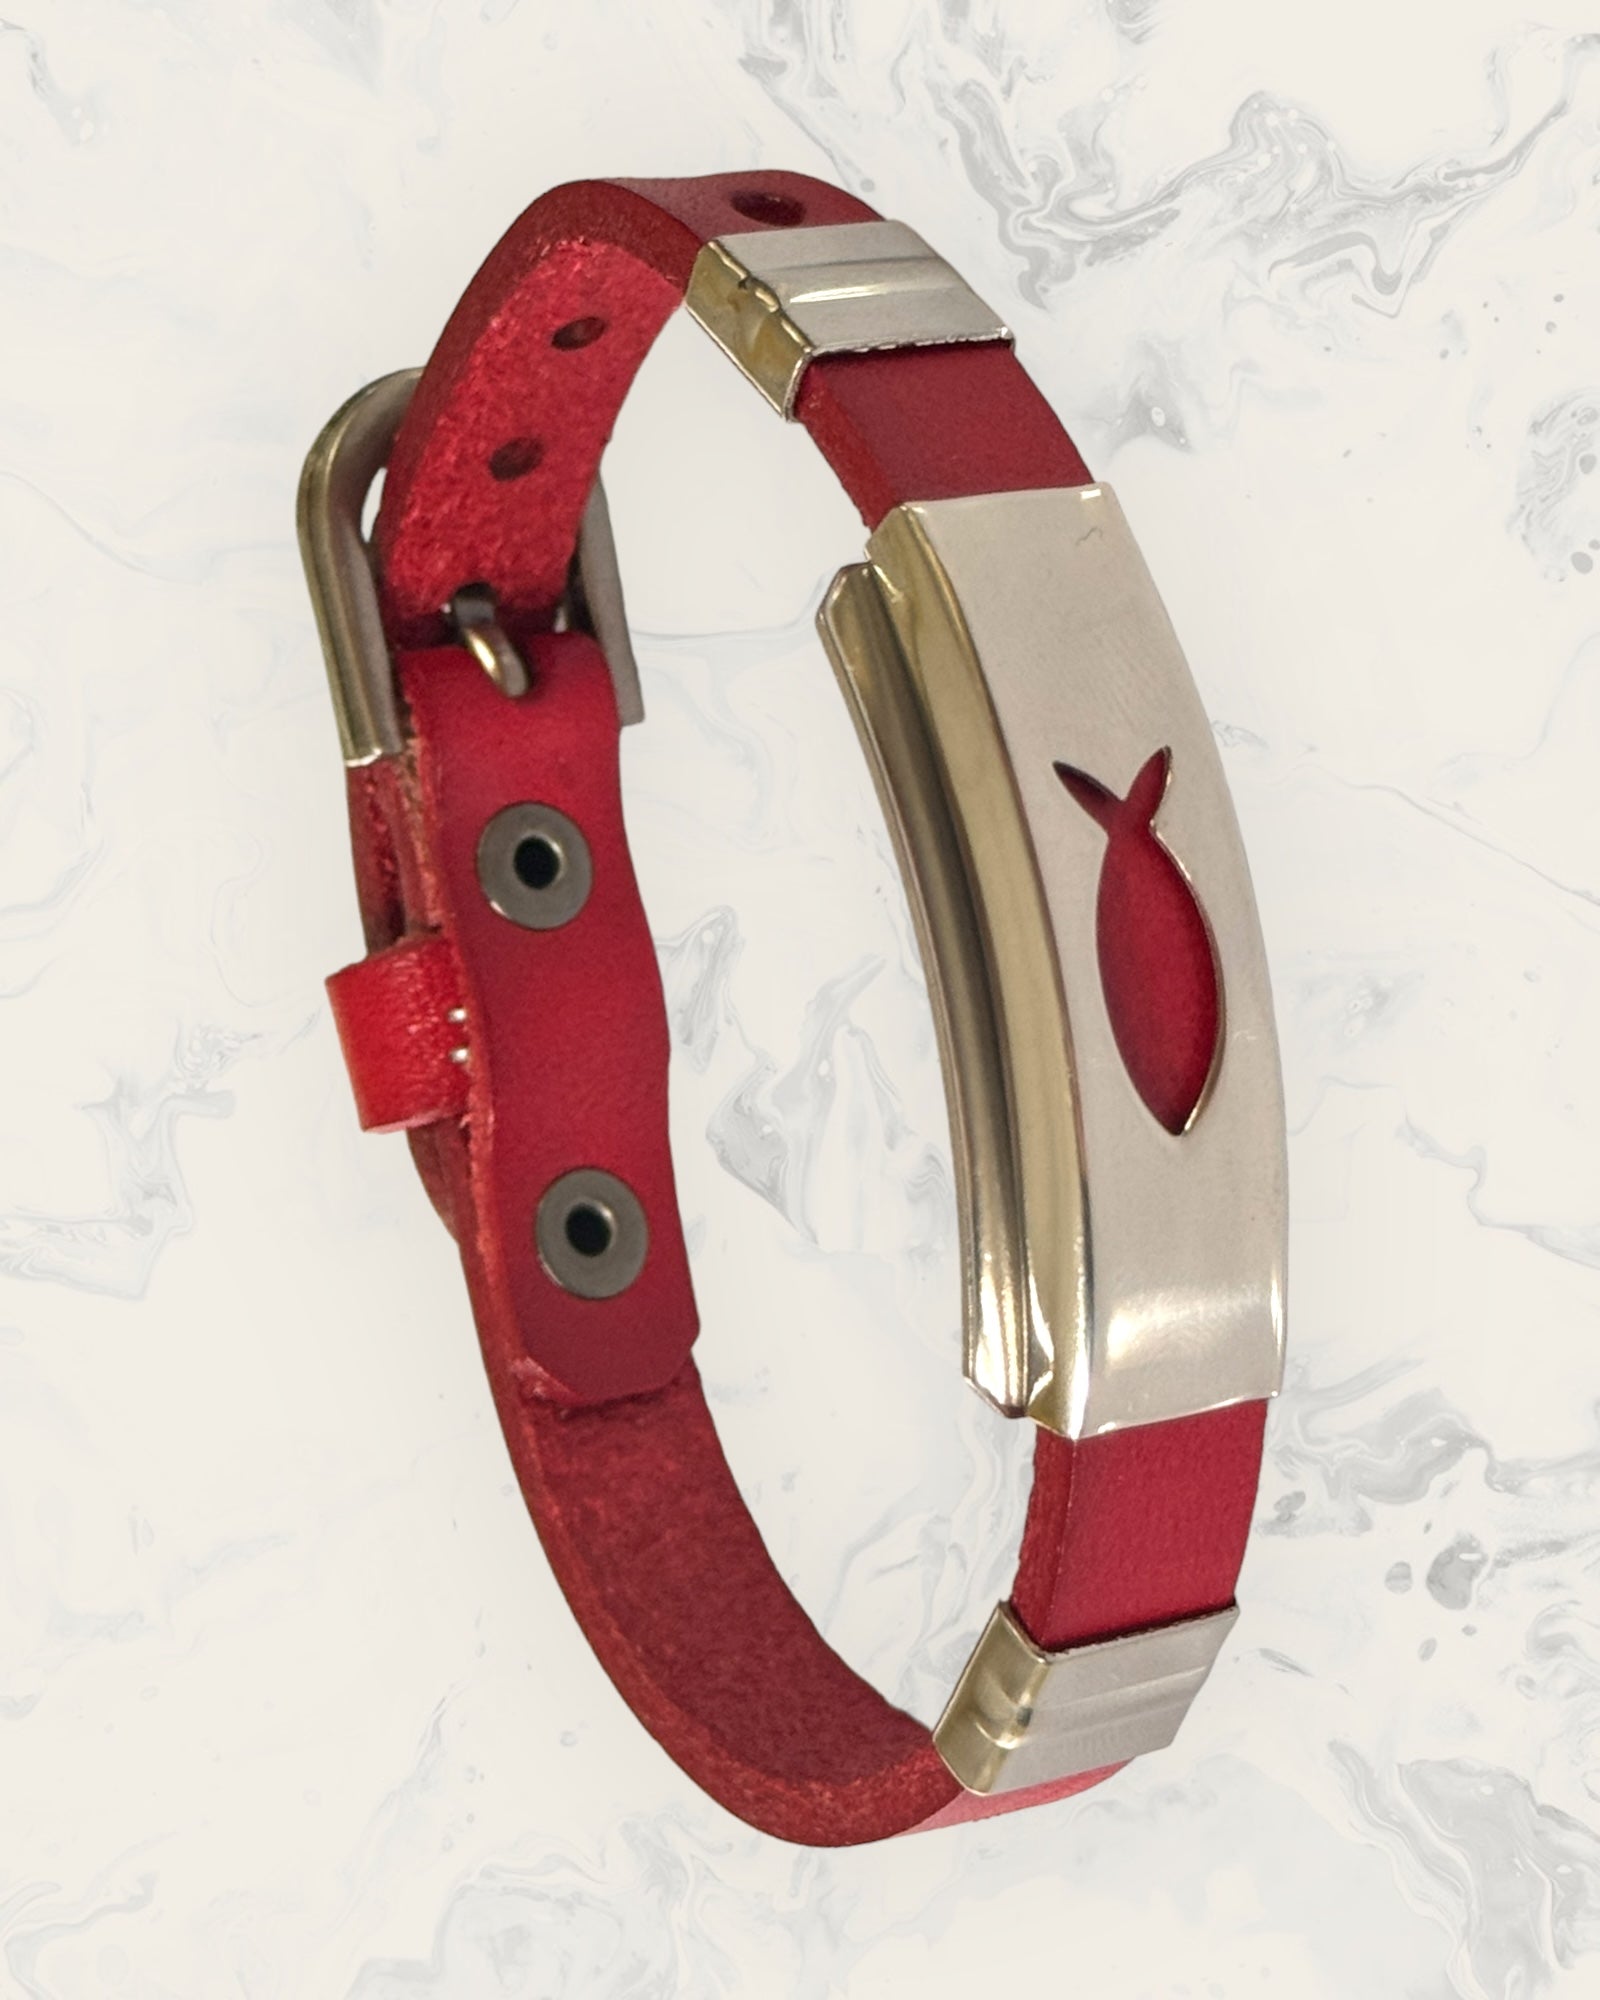 Natural Pain Relief and EMF Protection Bracelet Leather Band Color Red with Christian Fish design on a silver metal slider